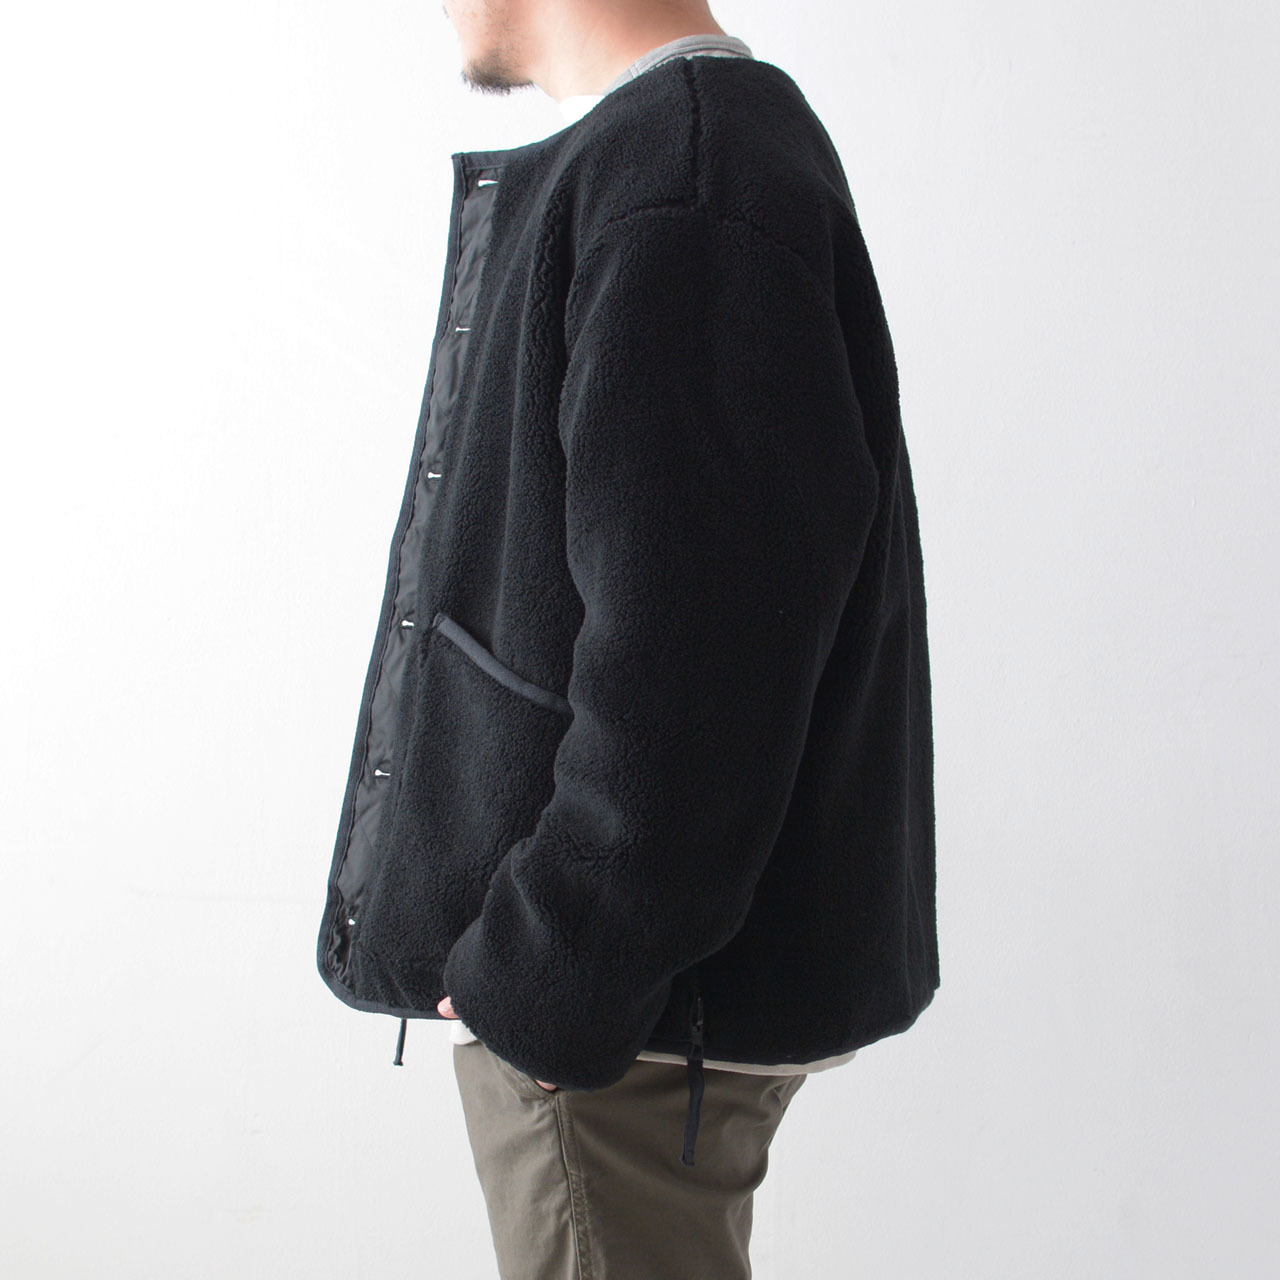 TAION [タイオン] MILITARY RIVERSIBLE CREW NECK DOWN JKT [R104BML-1] _f0051306_15371212.jpg